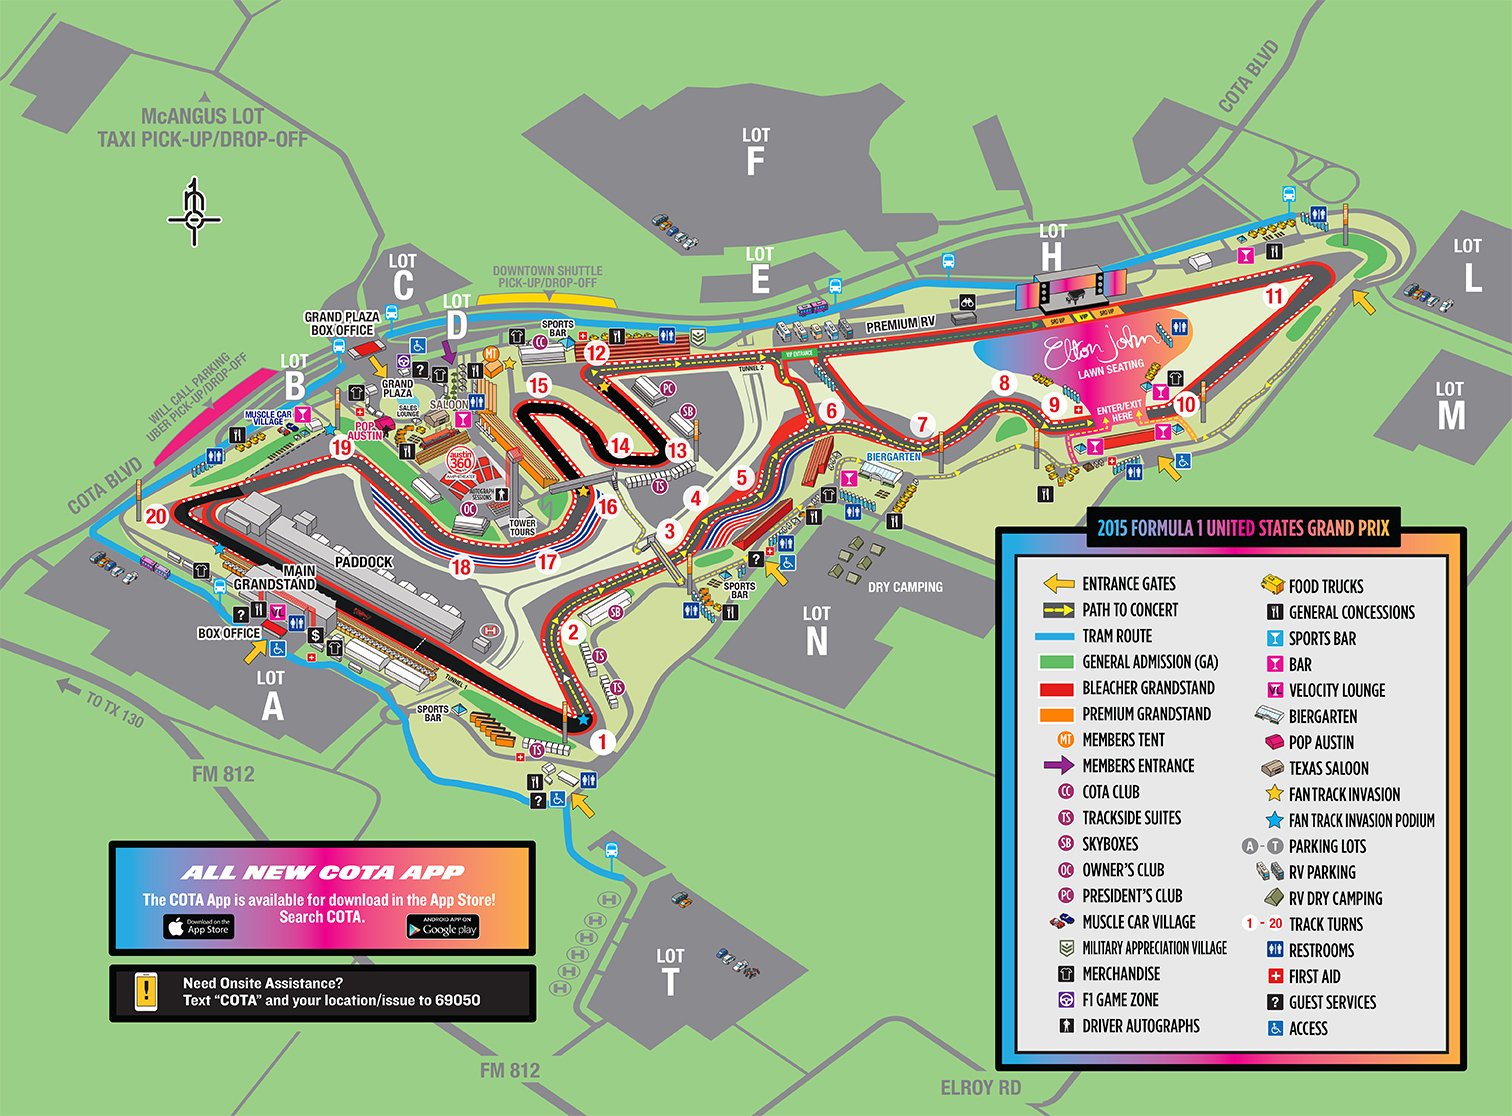 Welcome To Circuit Of The Americas For The 2015 Formula 1 United States Grand Prix Cota Blog